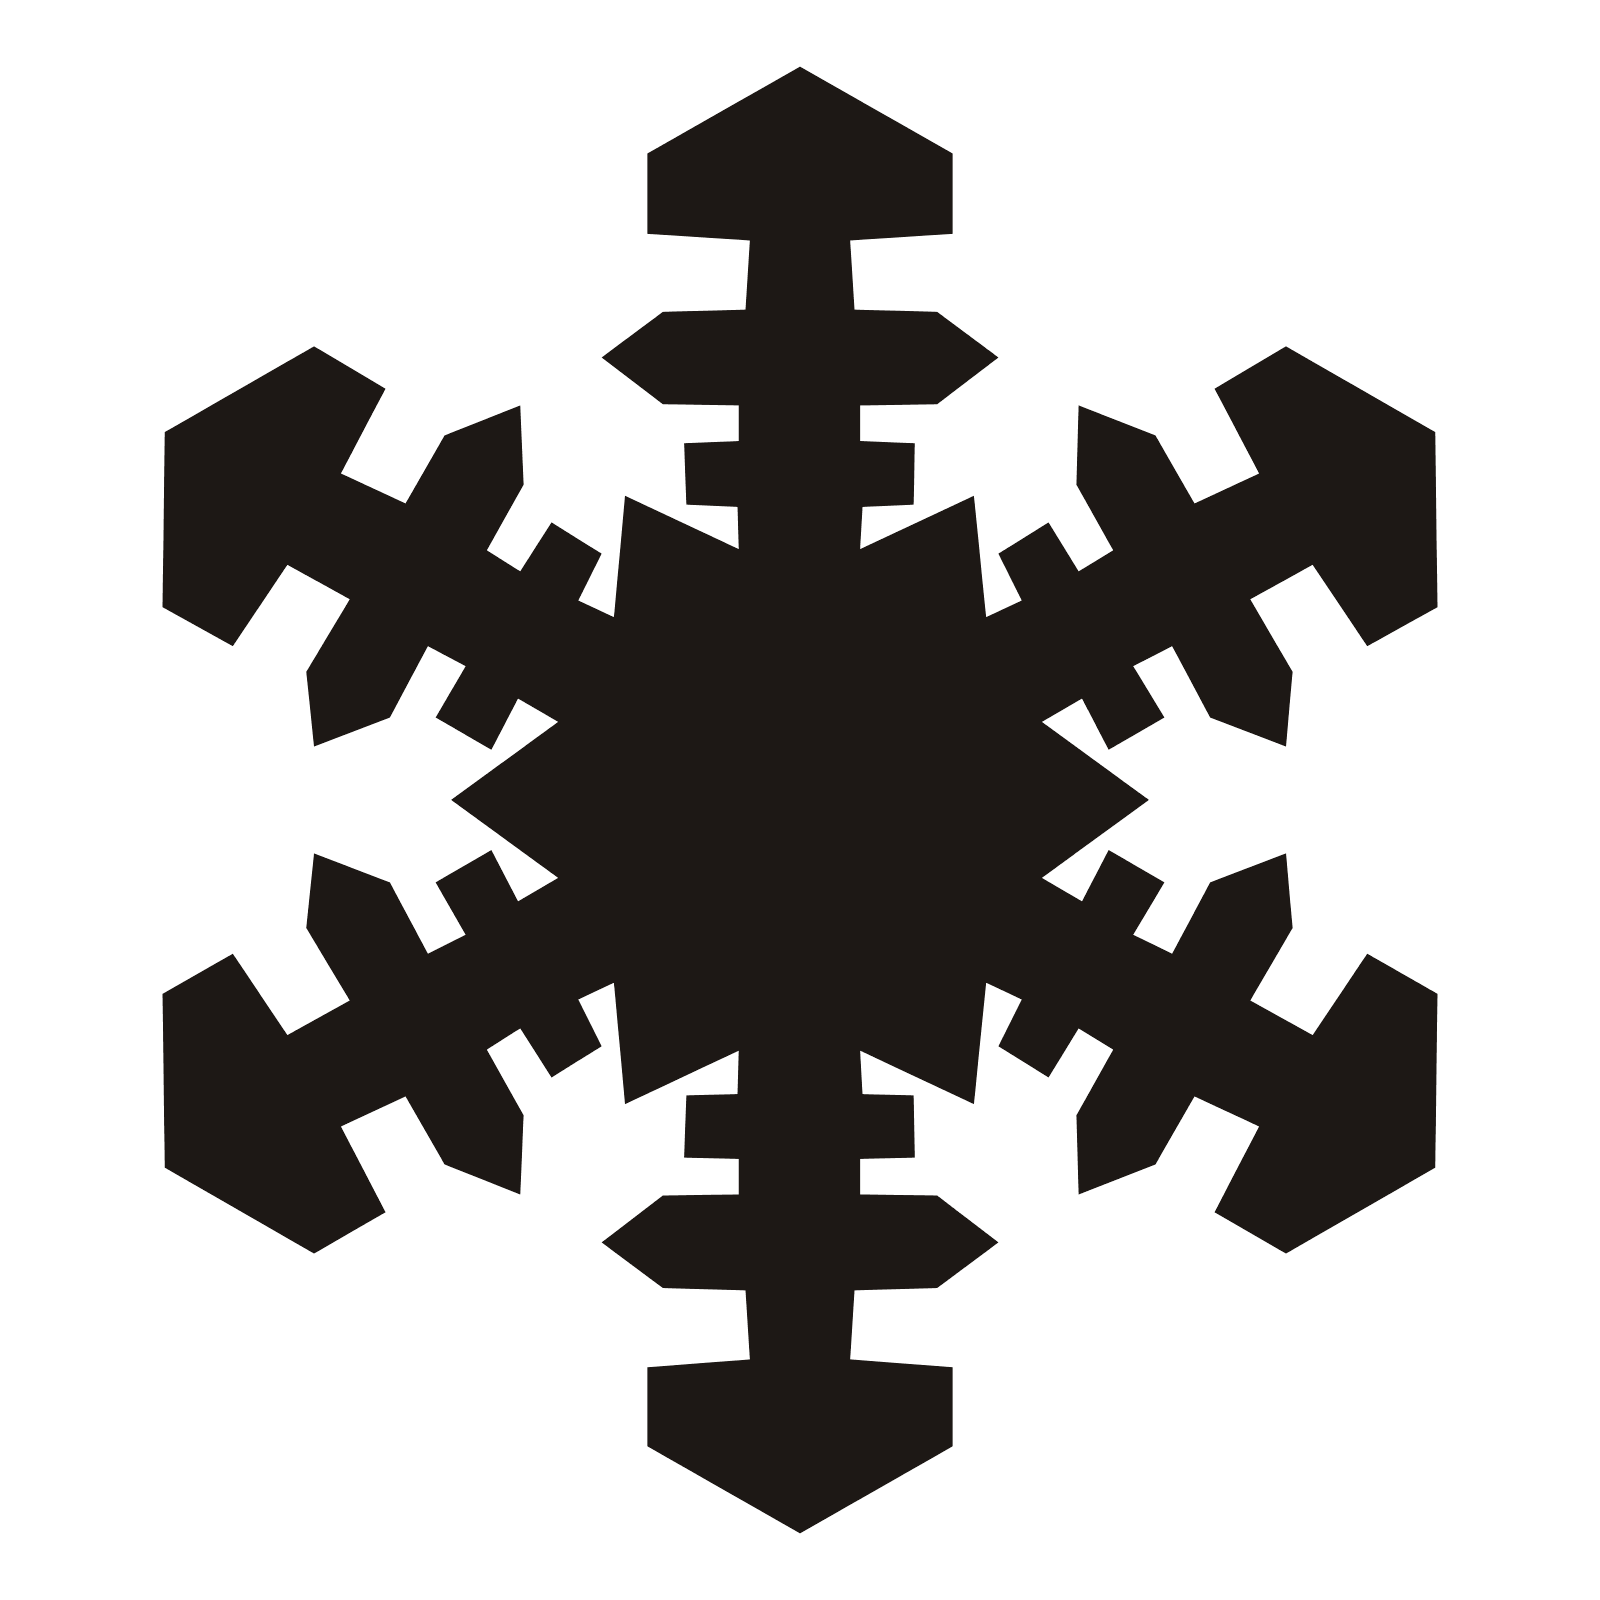 Snow Flakes PNG Transparent Images Free Download